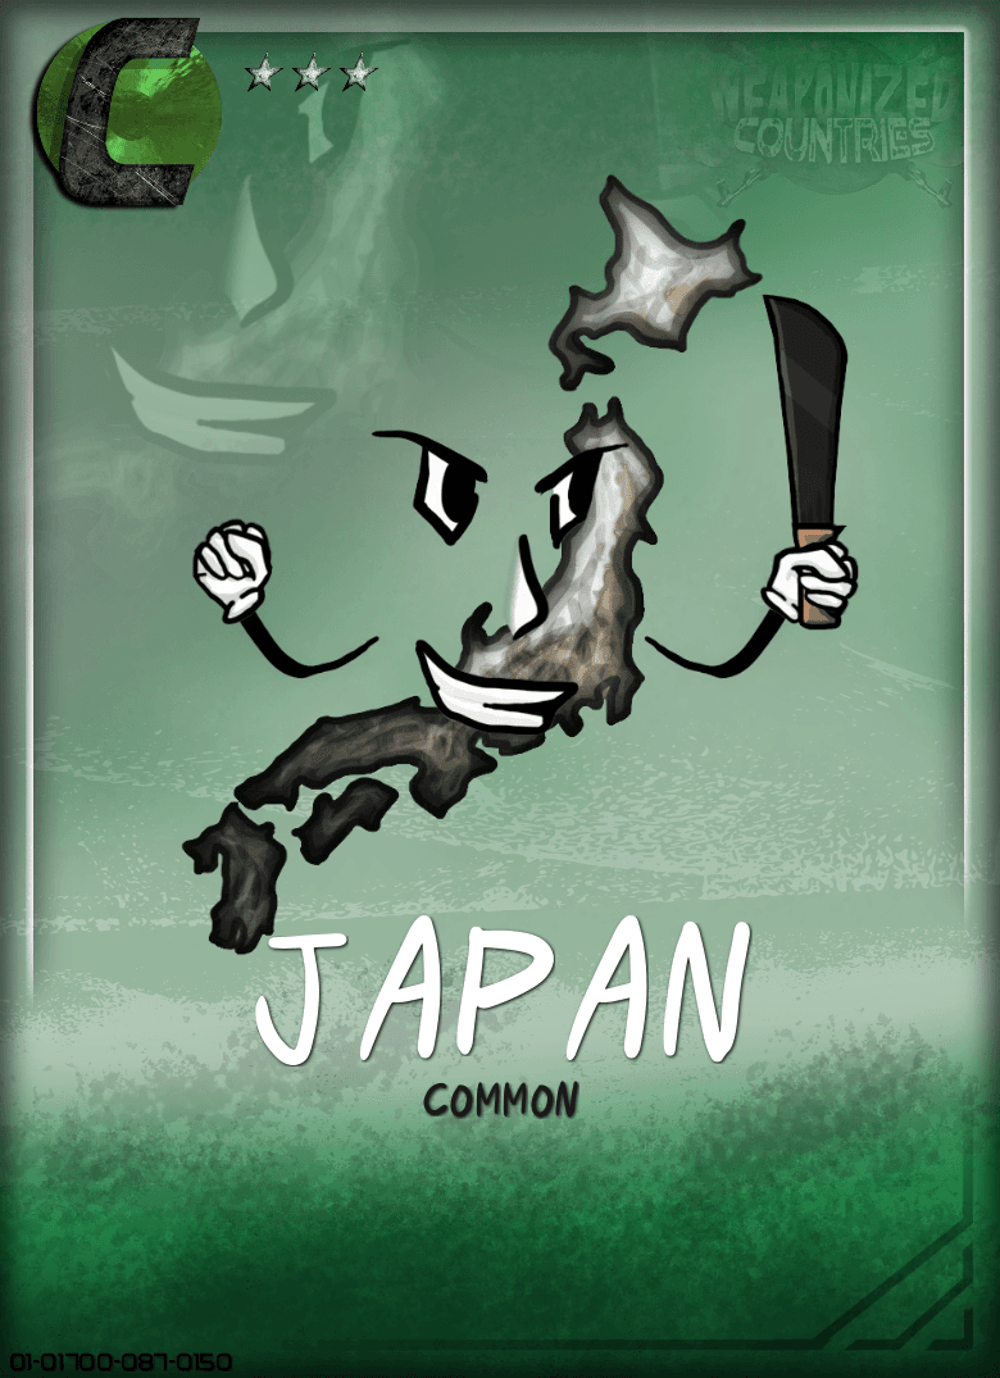 Weaponized Countries #1700 Japan